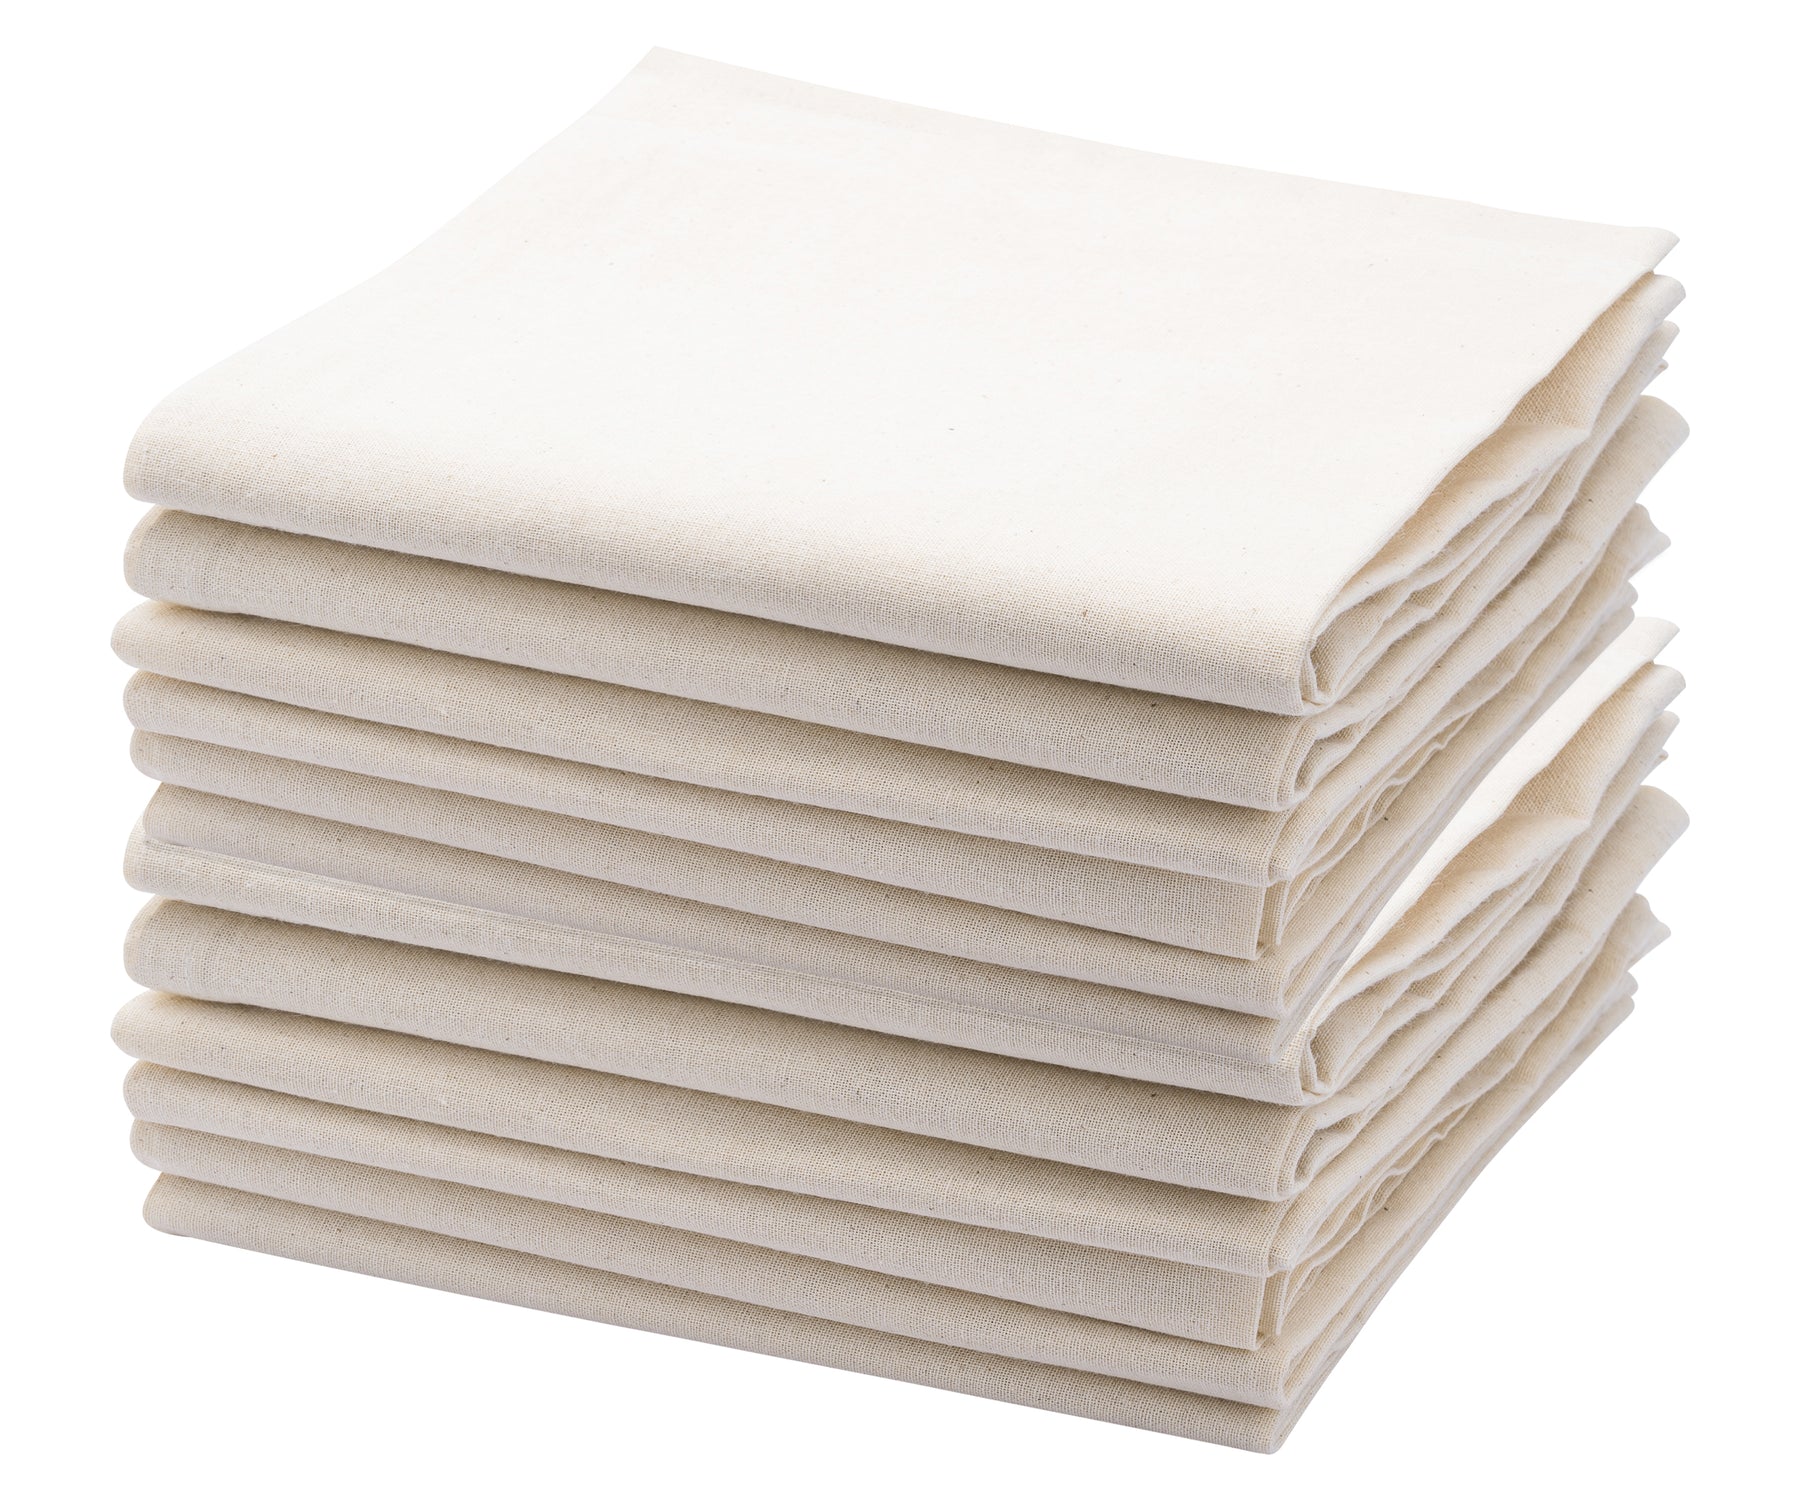 cotton flour sack towel is used for special occassions, like easter dish towels or easter kitchen towels, easter hand towels.